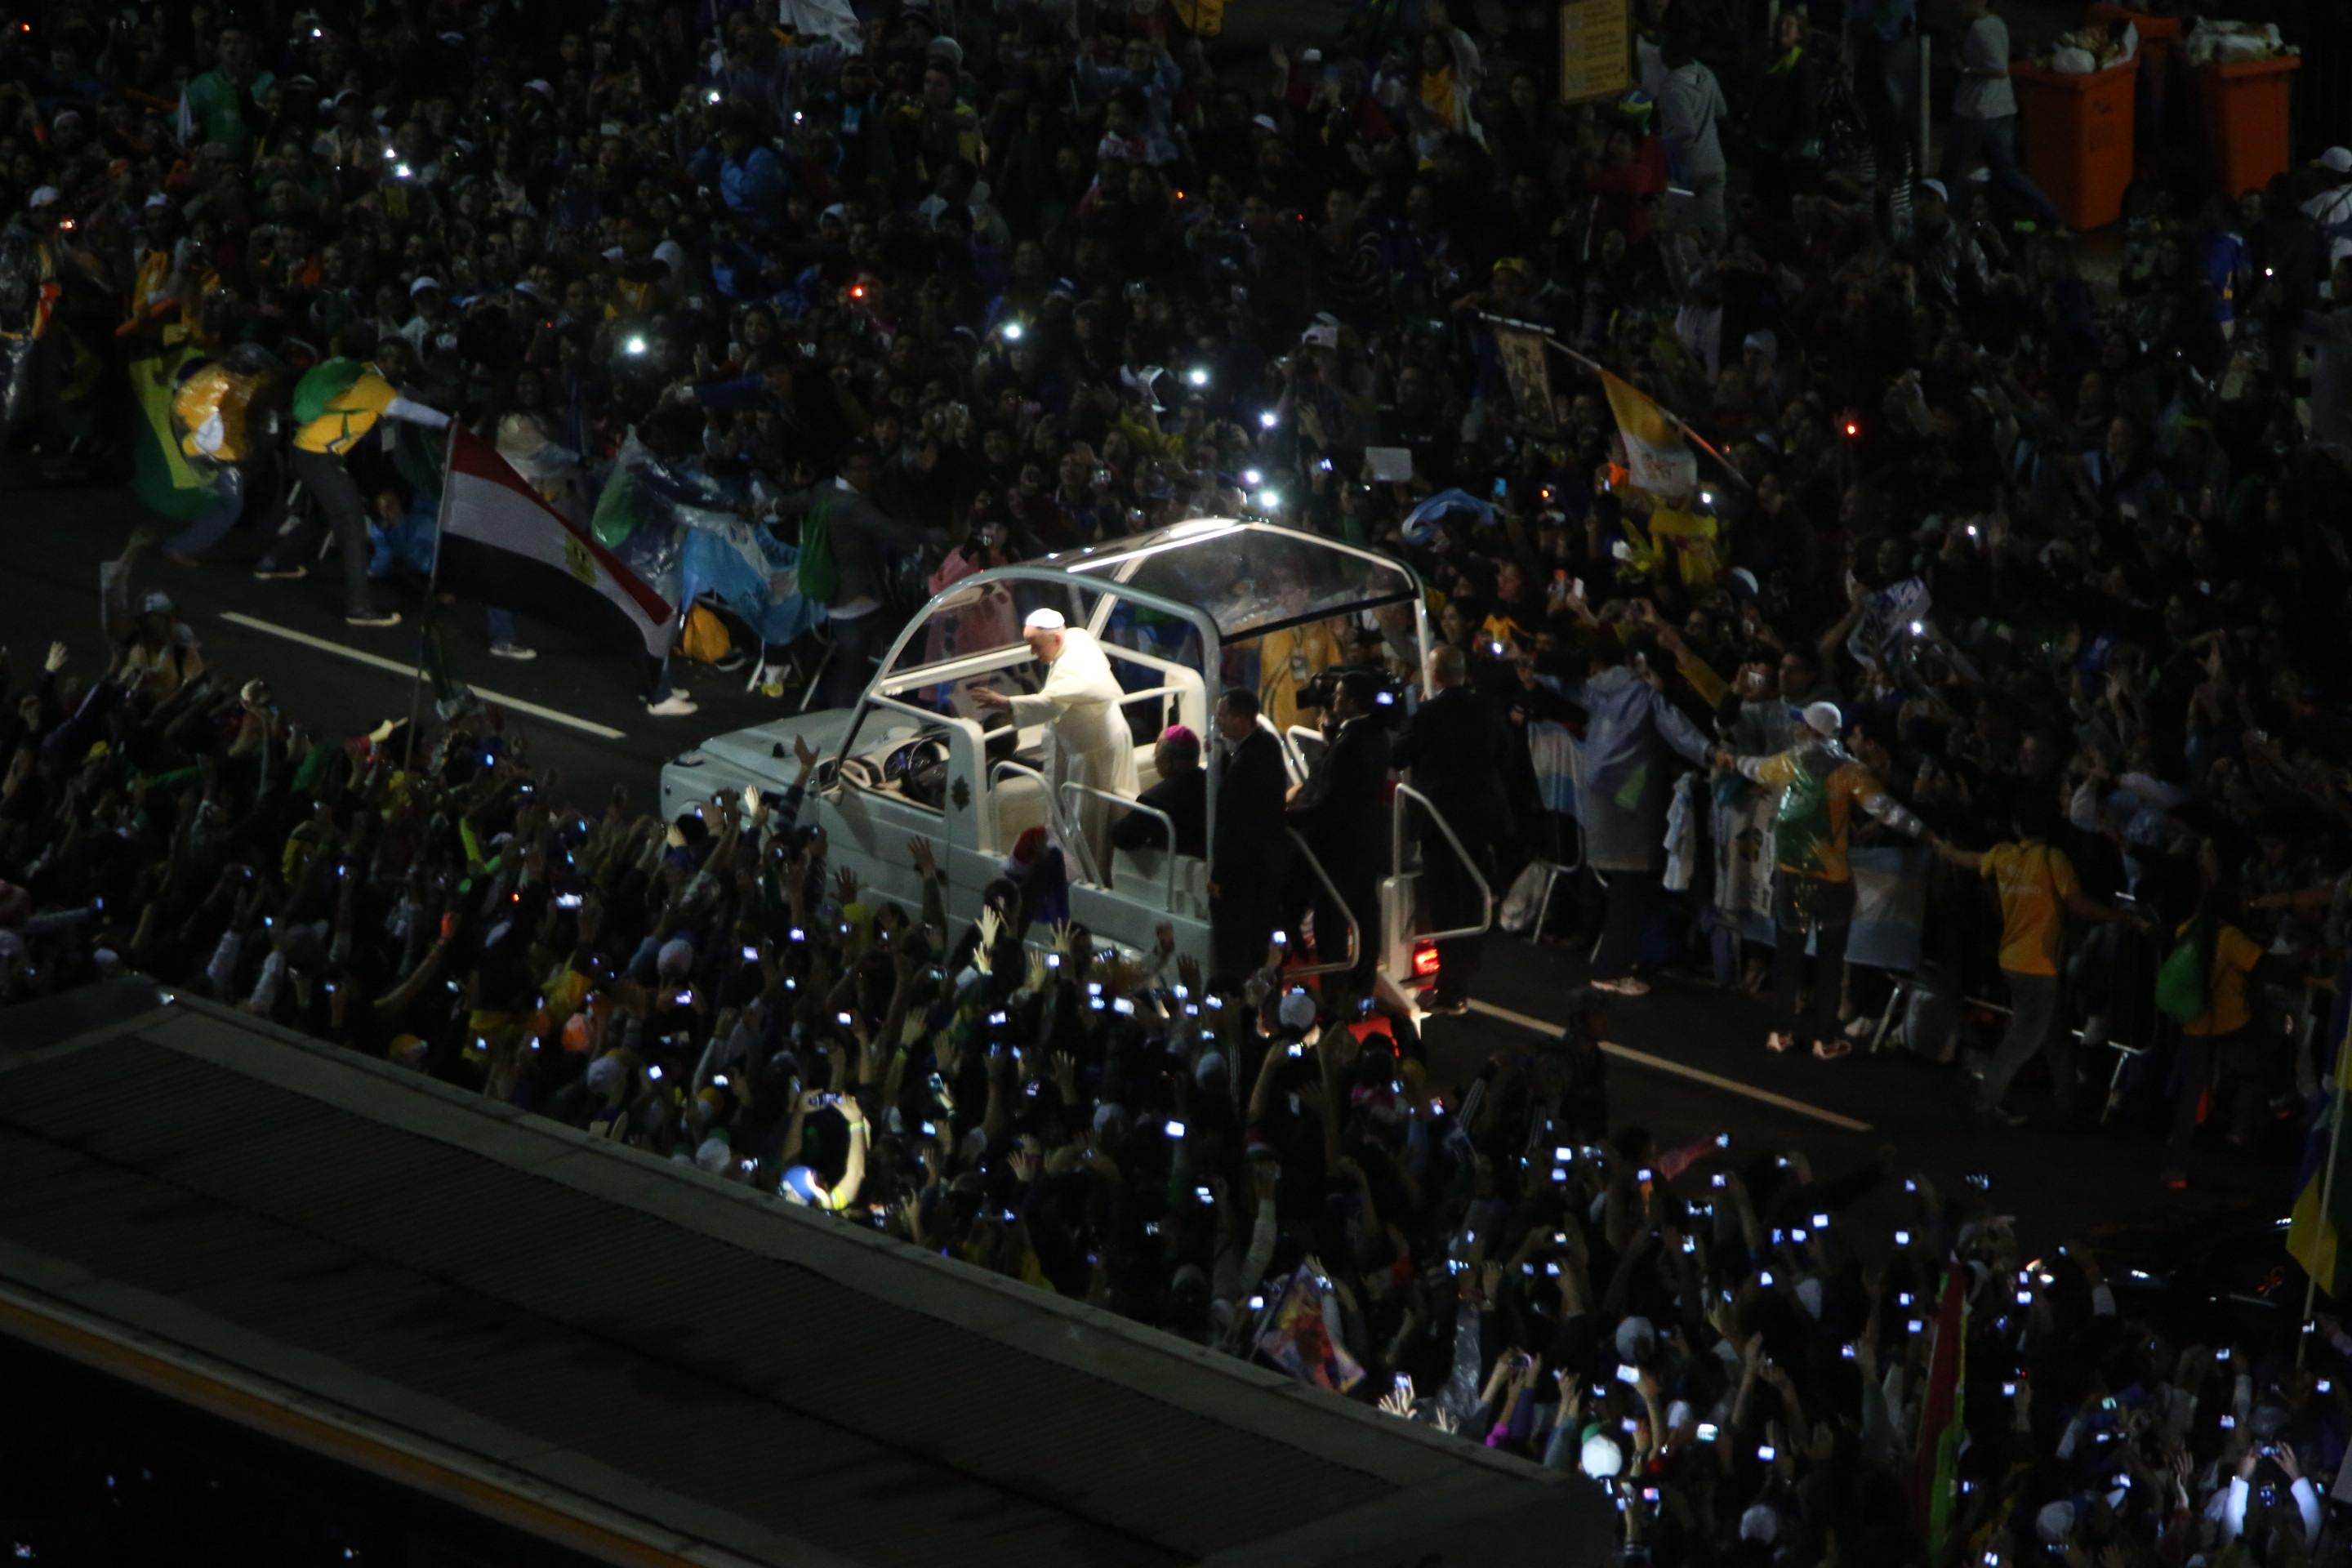 Pope Francis arrives at Copacabana beach for a welcoming ceremony for World Youth Day 2013 in Rio de Janeiro, Brazil.